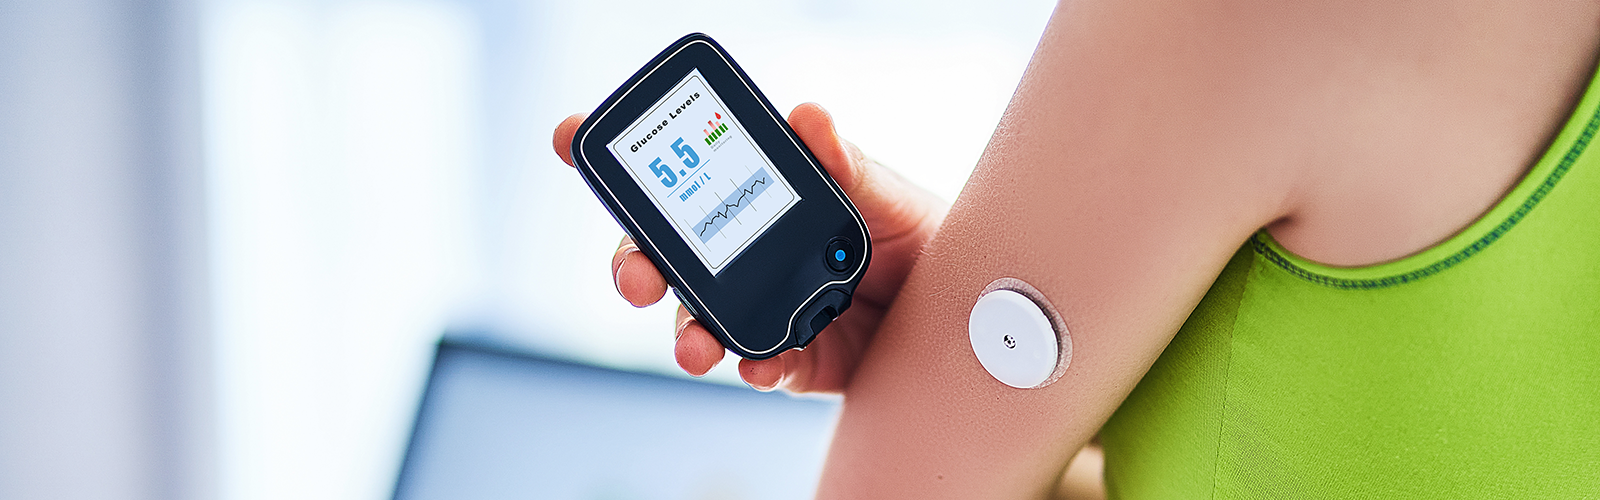 Best Continuous Glucose Monitors For Measuring Blood Sugar [2021]